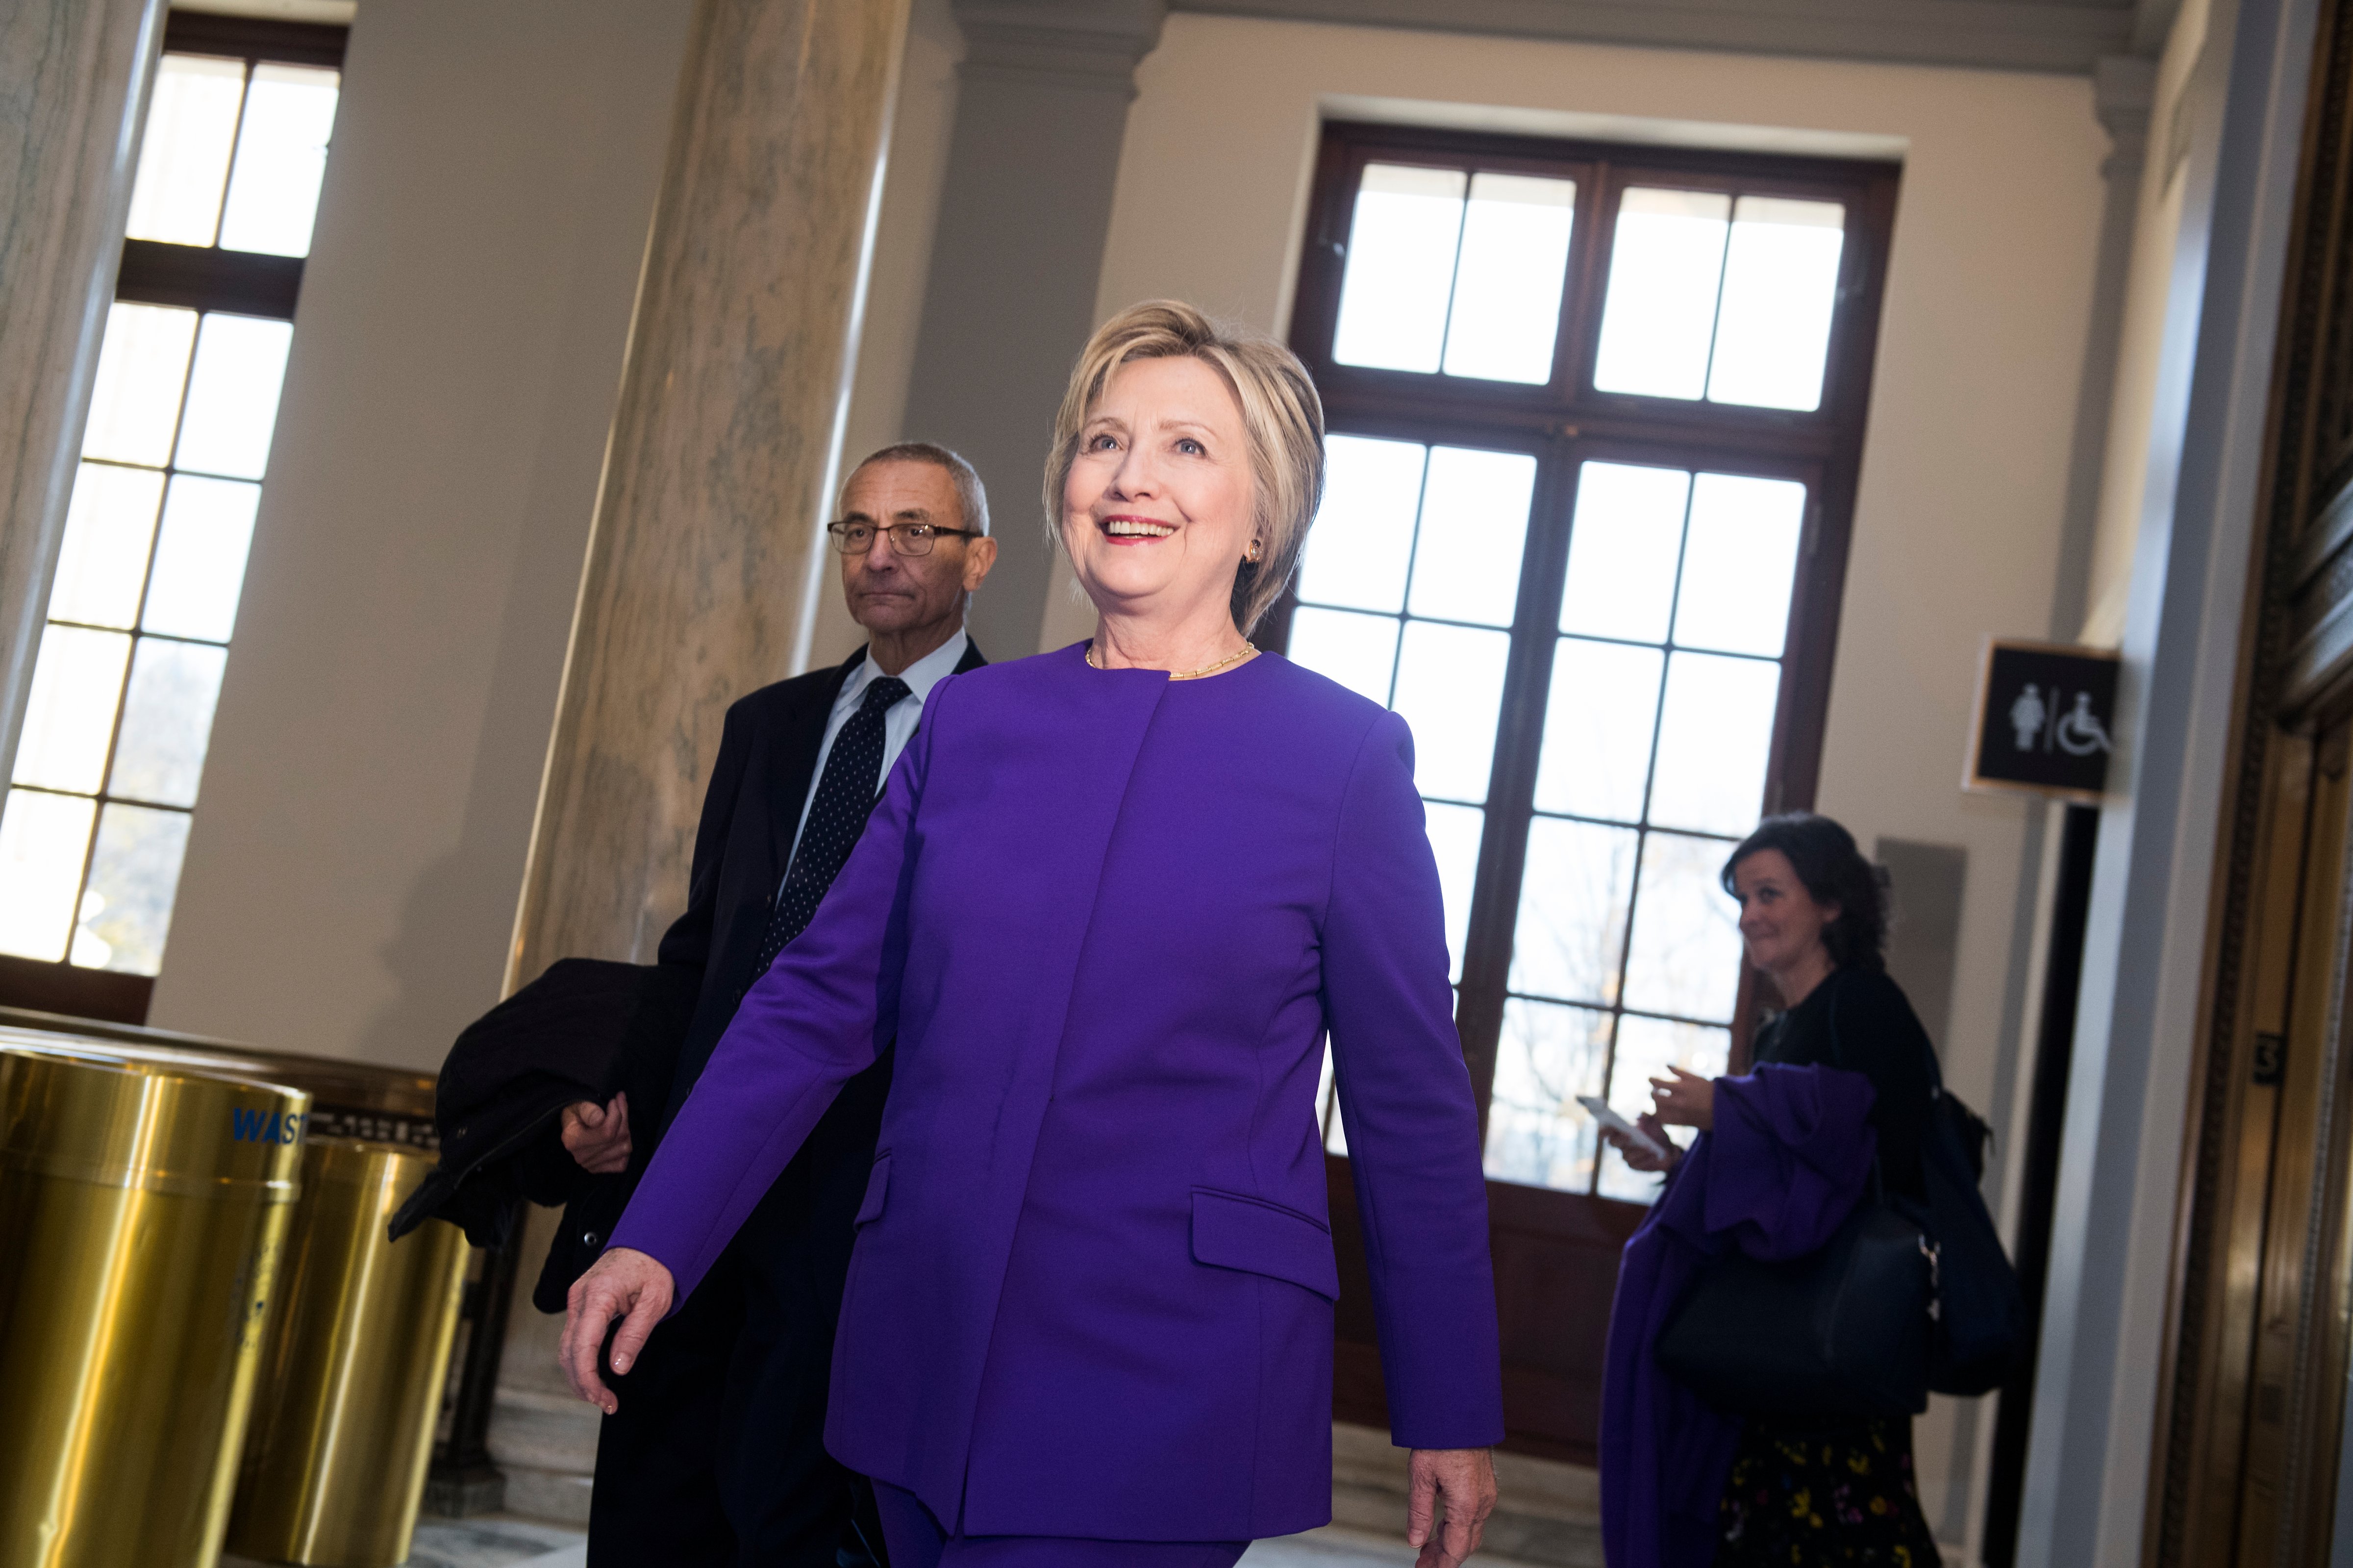 Former Secretary of State Hillary Clinton and John Podesta arrive for a portrait unveiling ceremony for retiring Senate Minority Leader Harry Reid, D-Nev., in Russell Building's Kennedy Caucus Room, December 08, 2016. (Tom Williams&mdash;CQ-Roll Call,Inc.)